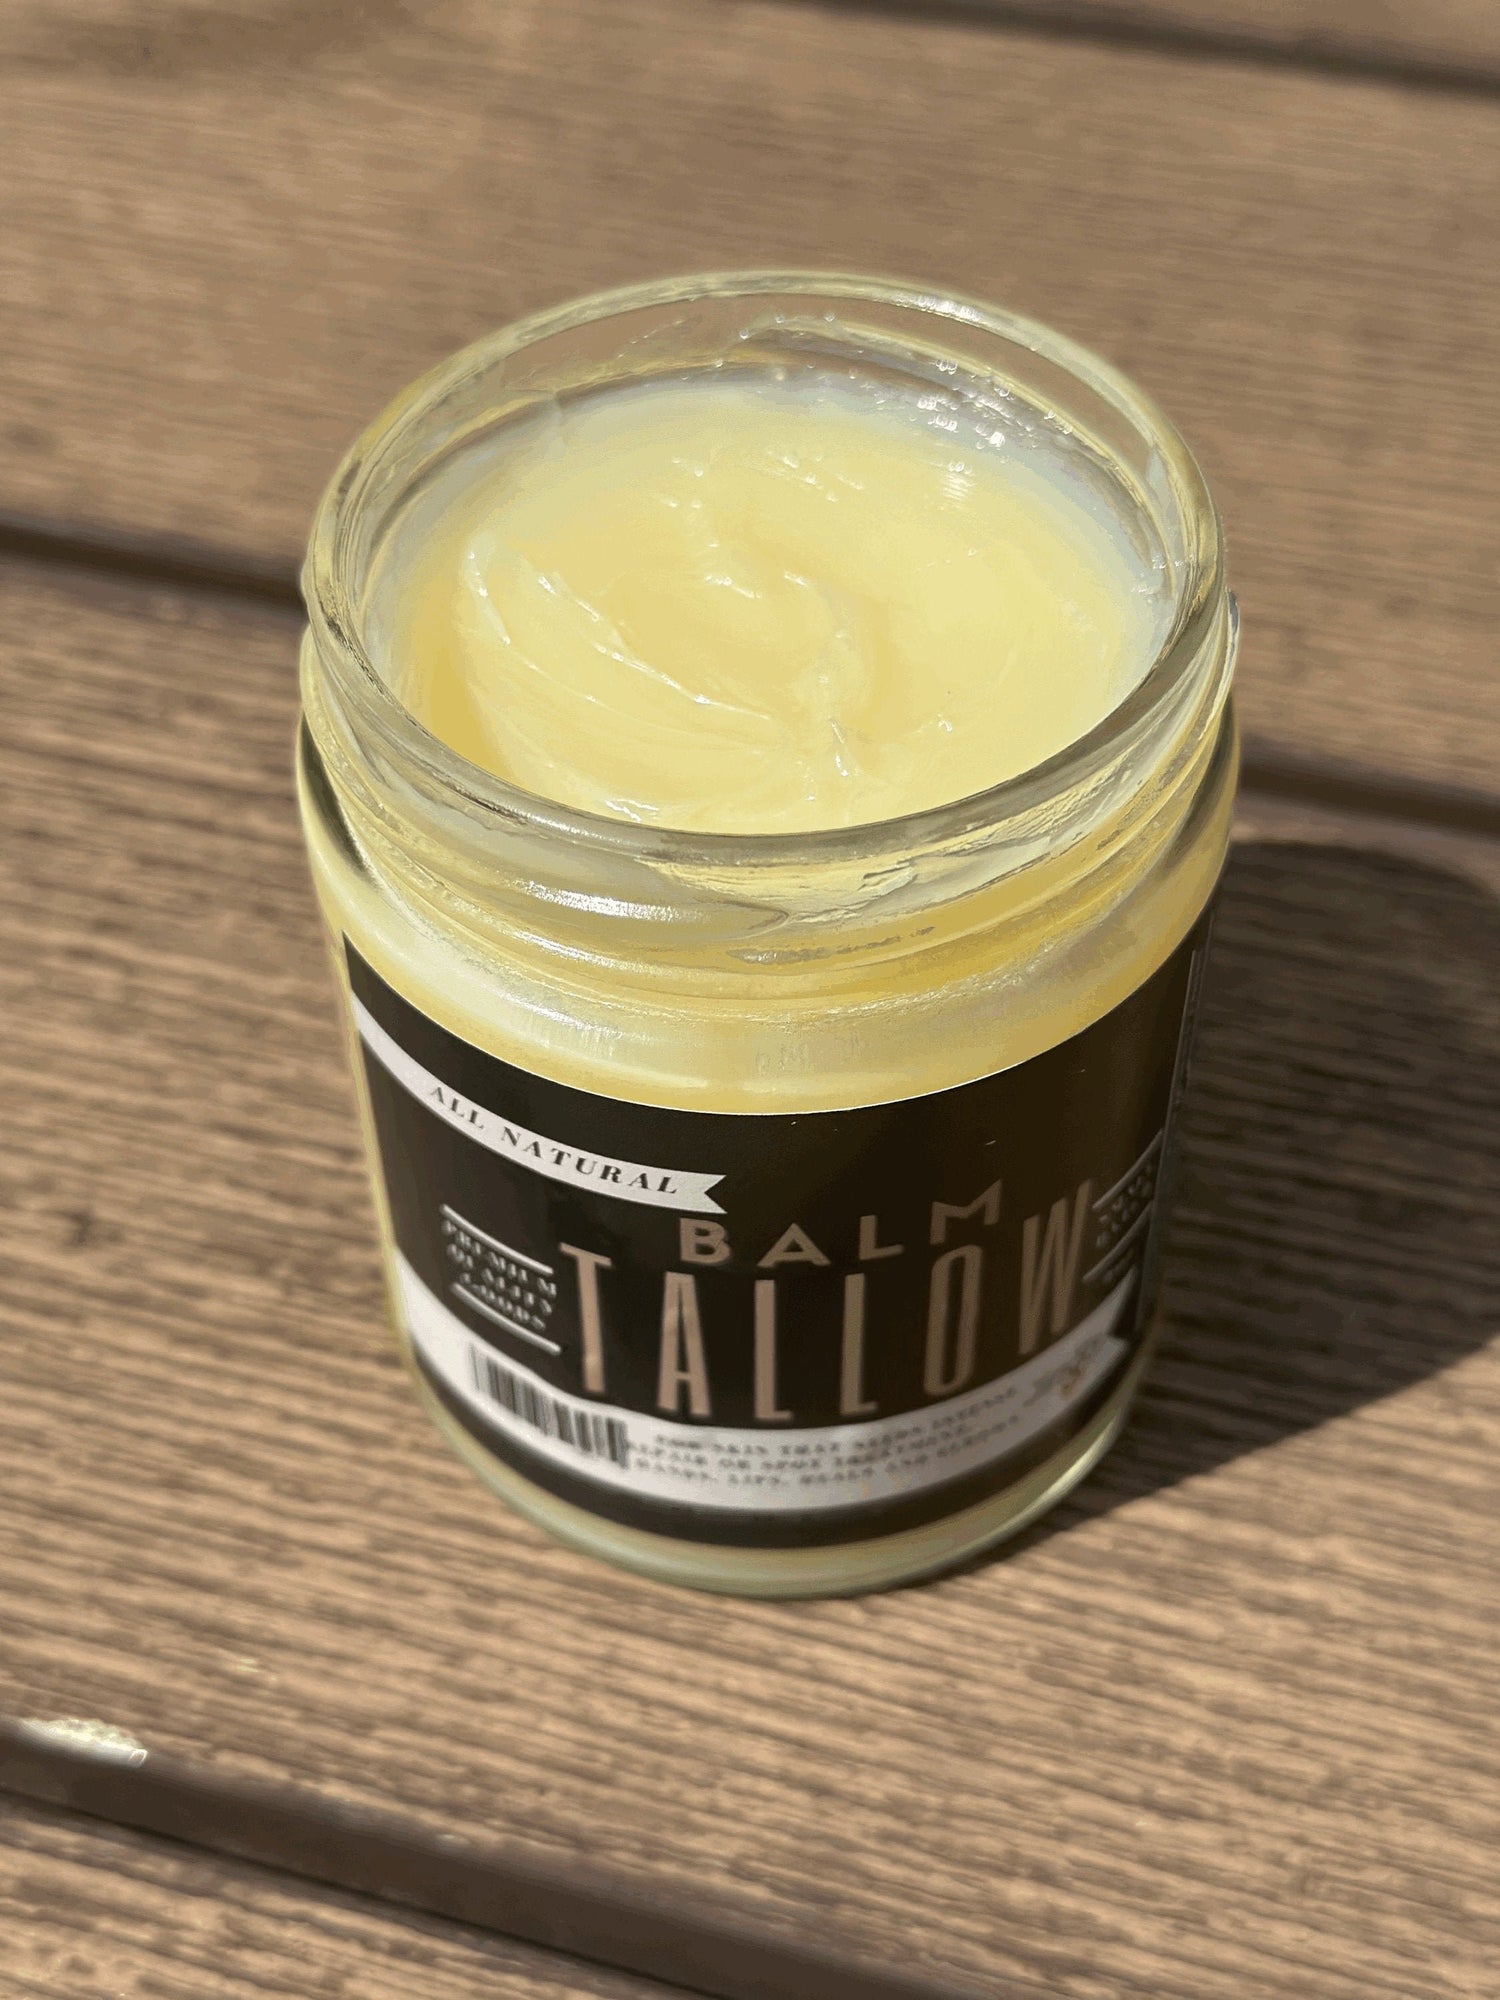 Hailing from a small batch, premium beef tallow company, we're reintroducing the captivating essence of tallow into a variety of products. Through infused tallow cooking oil, soft-glow candles, and sumptuous moisturizers, we are reviving the magic of tallow – one product at a time. 